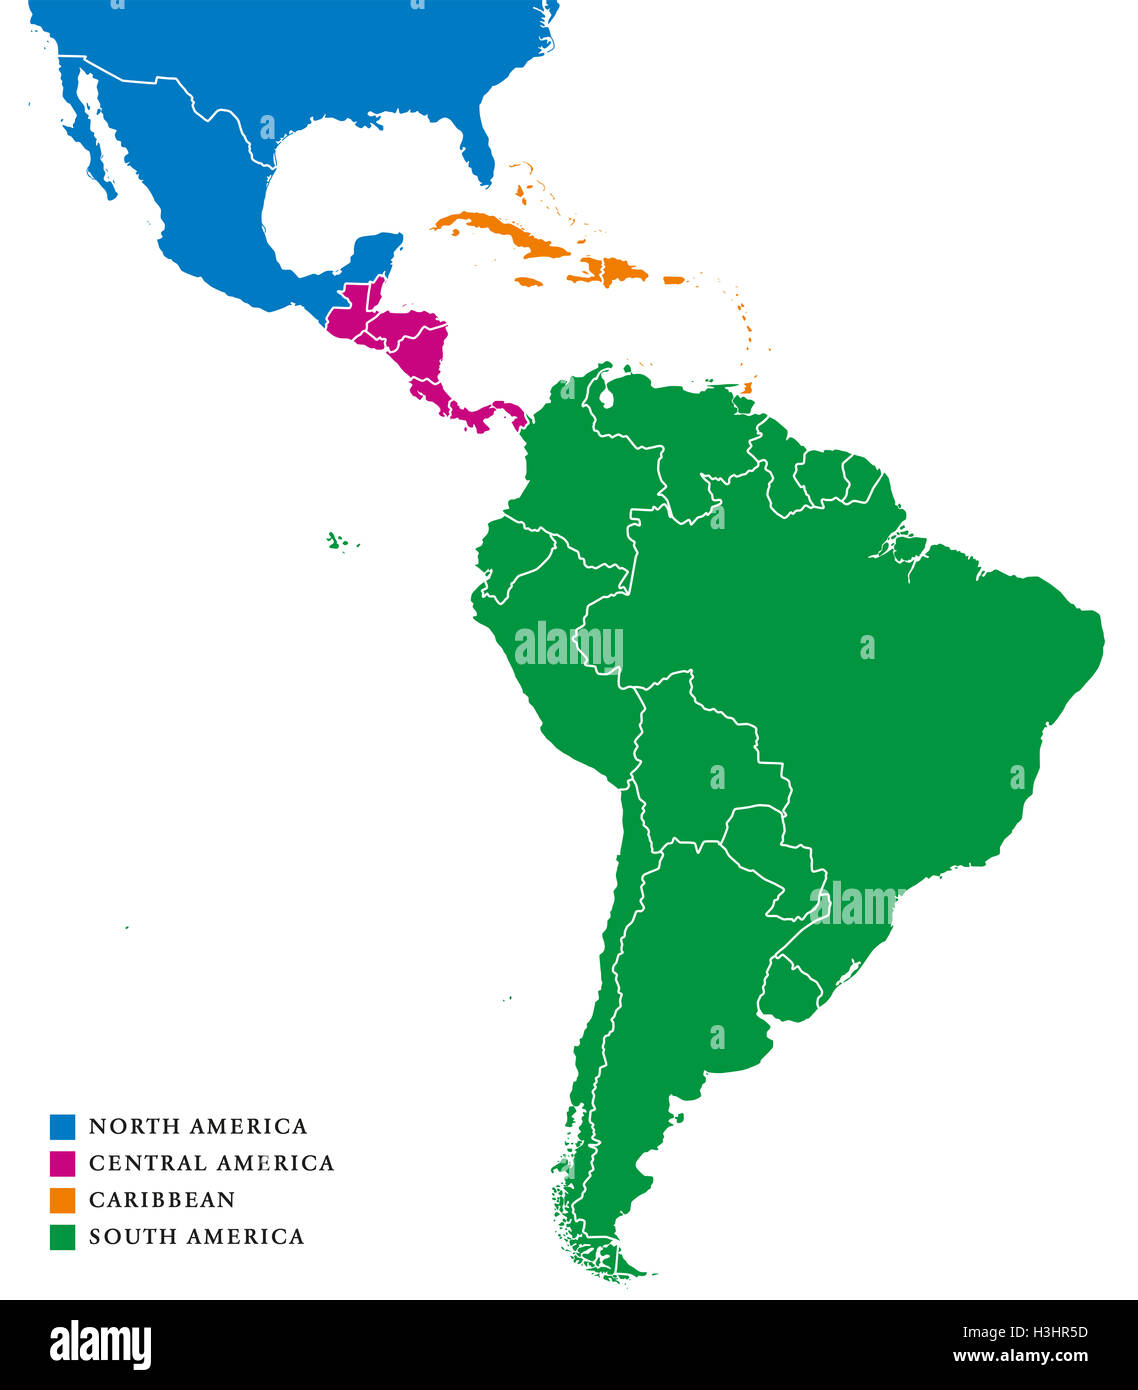 Latin America subregions map. The subregions Caribbean, North, Central and South America in different colors and with borders. Stock Photo